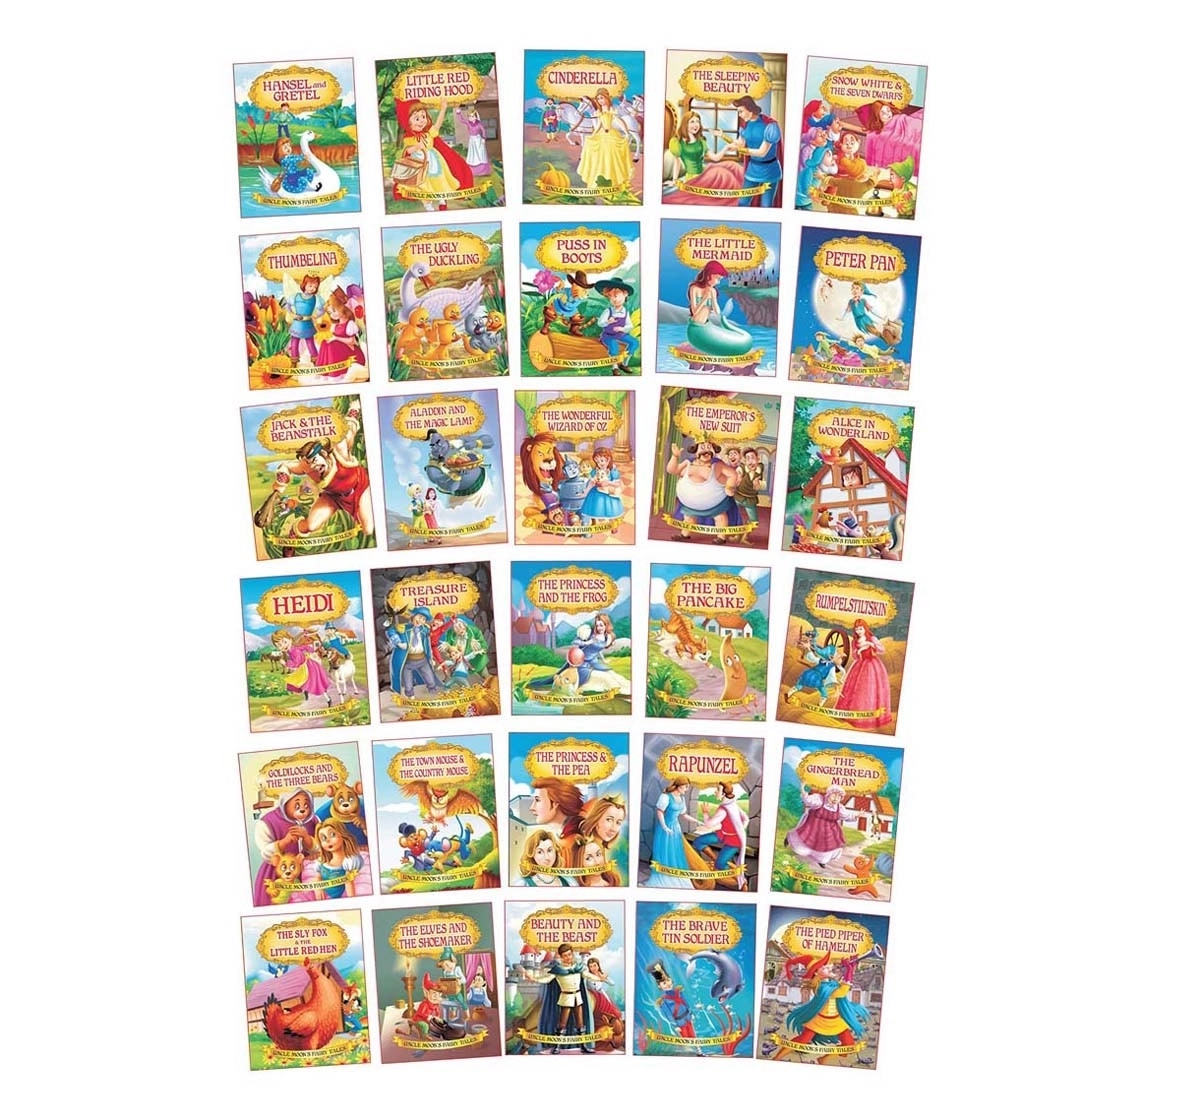 Dreamland Paperback Uncle Moon 30 Pack Books for Kids 2Y+, Multicolour